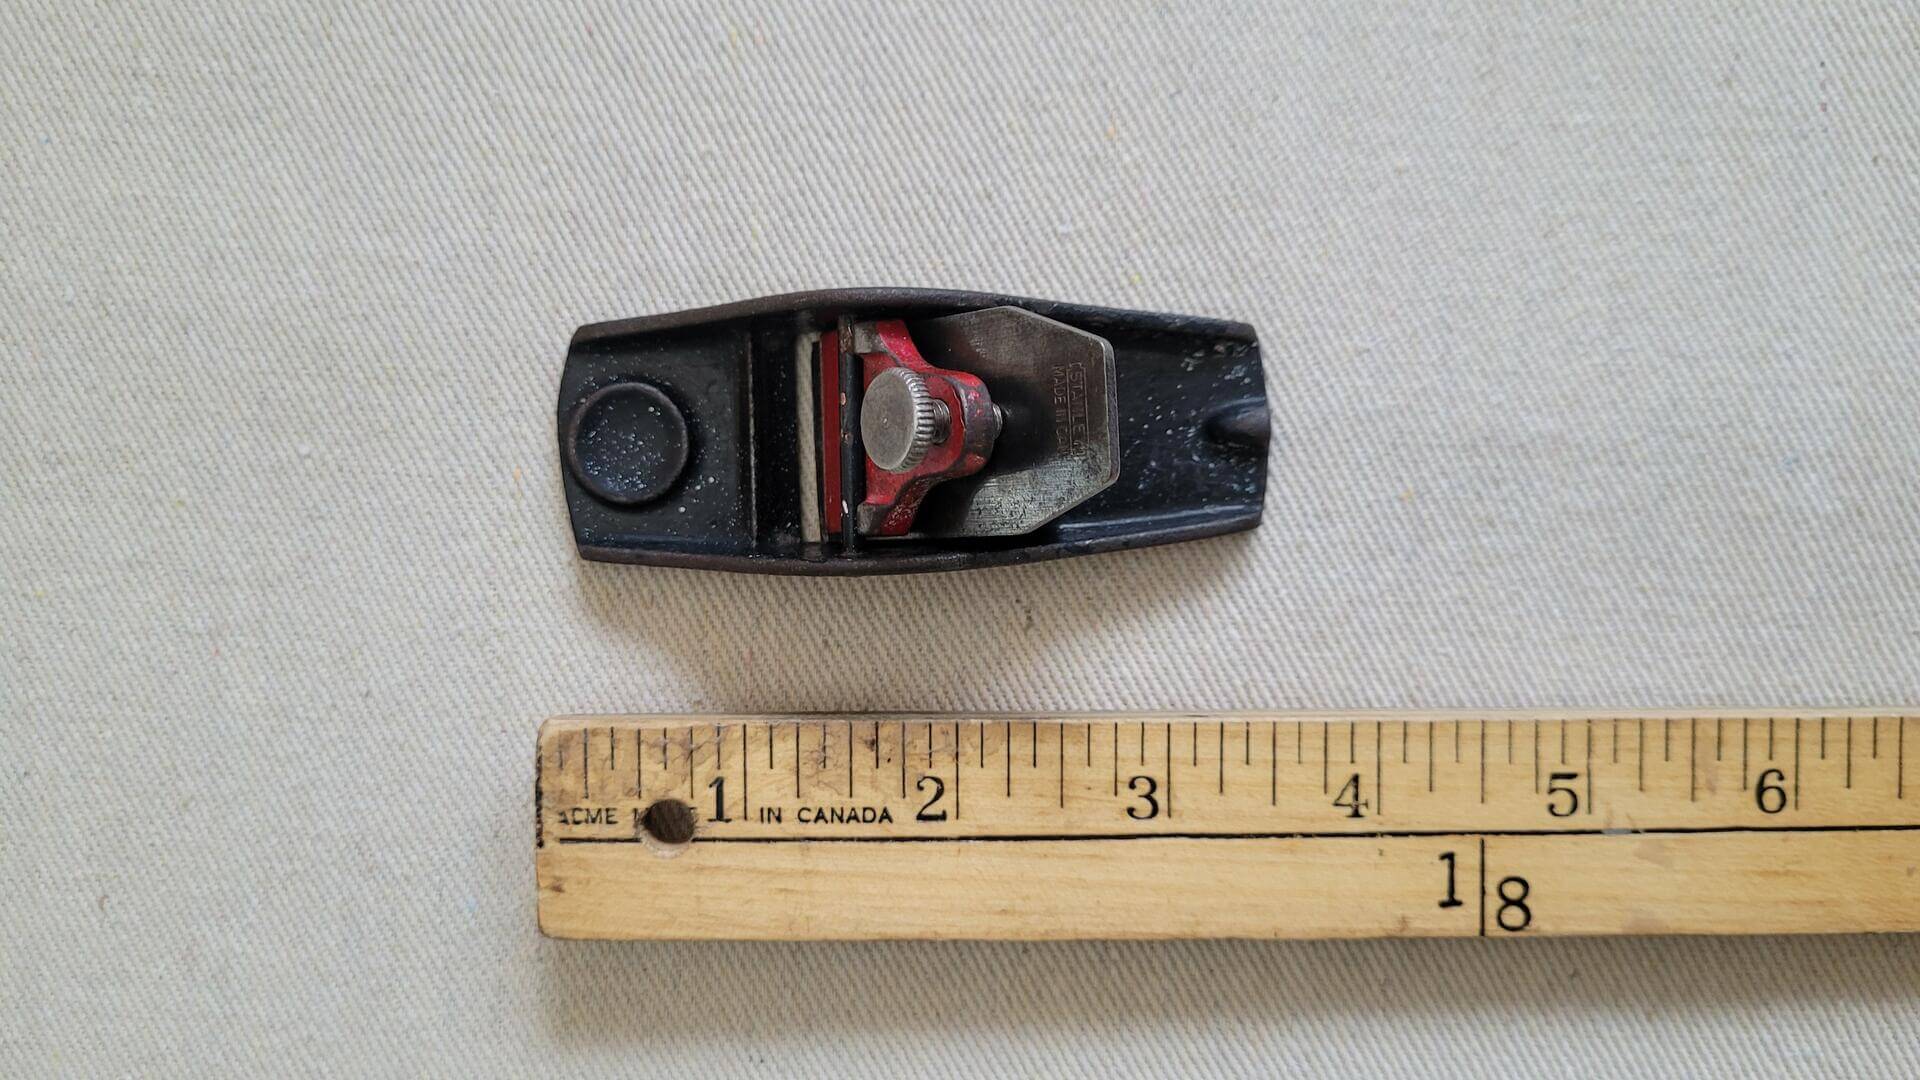 Stanley No 101 block plane, 3 1/2 inches long, 1 inch cutter, cast iron, japanned finish. Rare made in Canada Stanley vintage collectible miniature block plane for fine woodworking made from 1877-1962